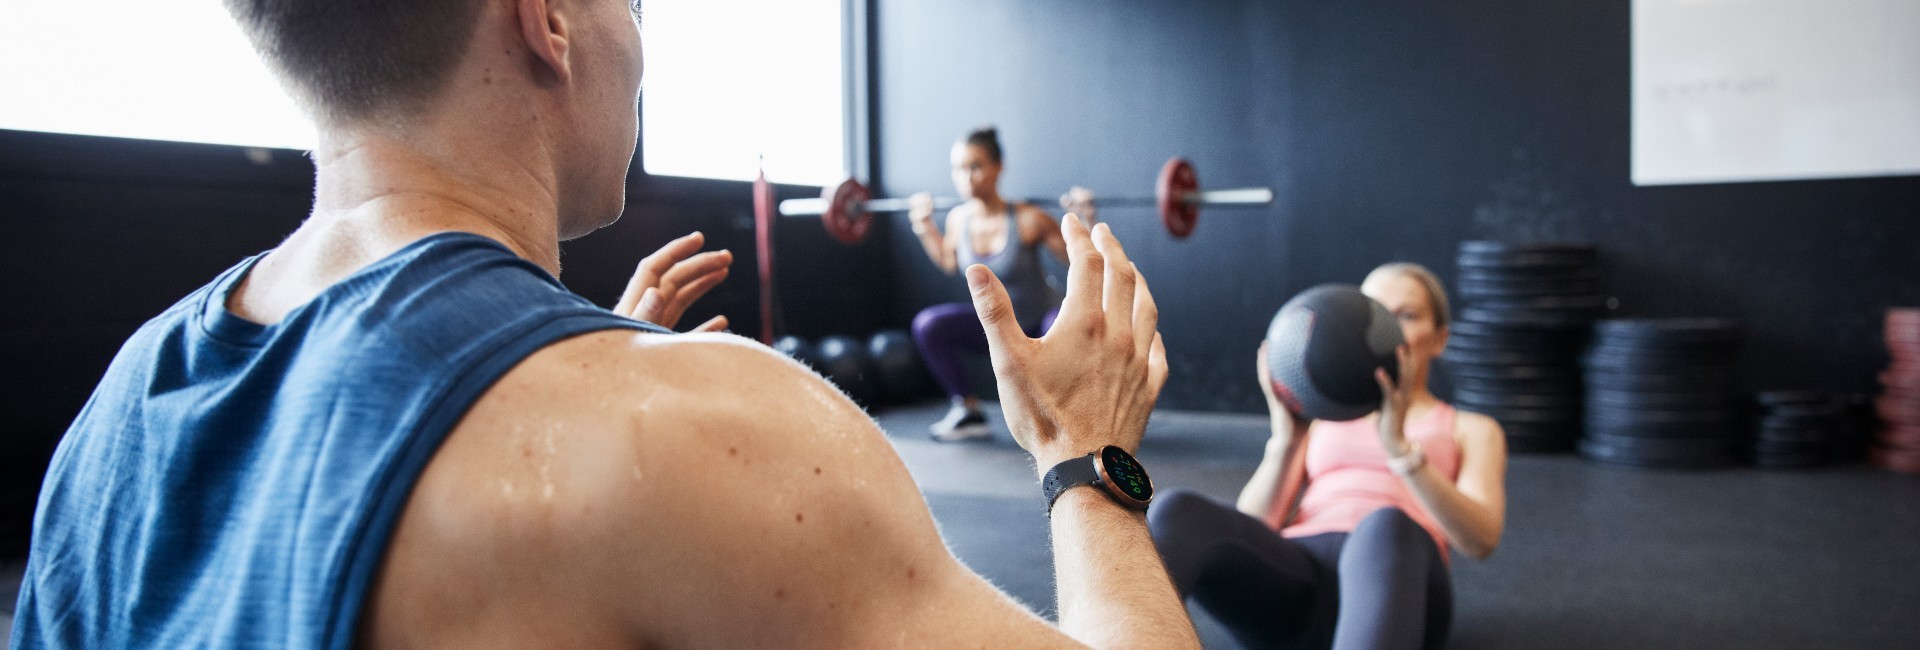 What Is Functional Training and How Can It Benefit You?